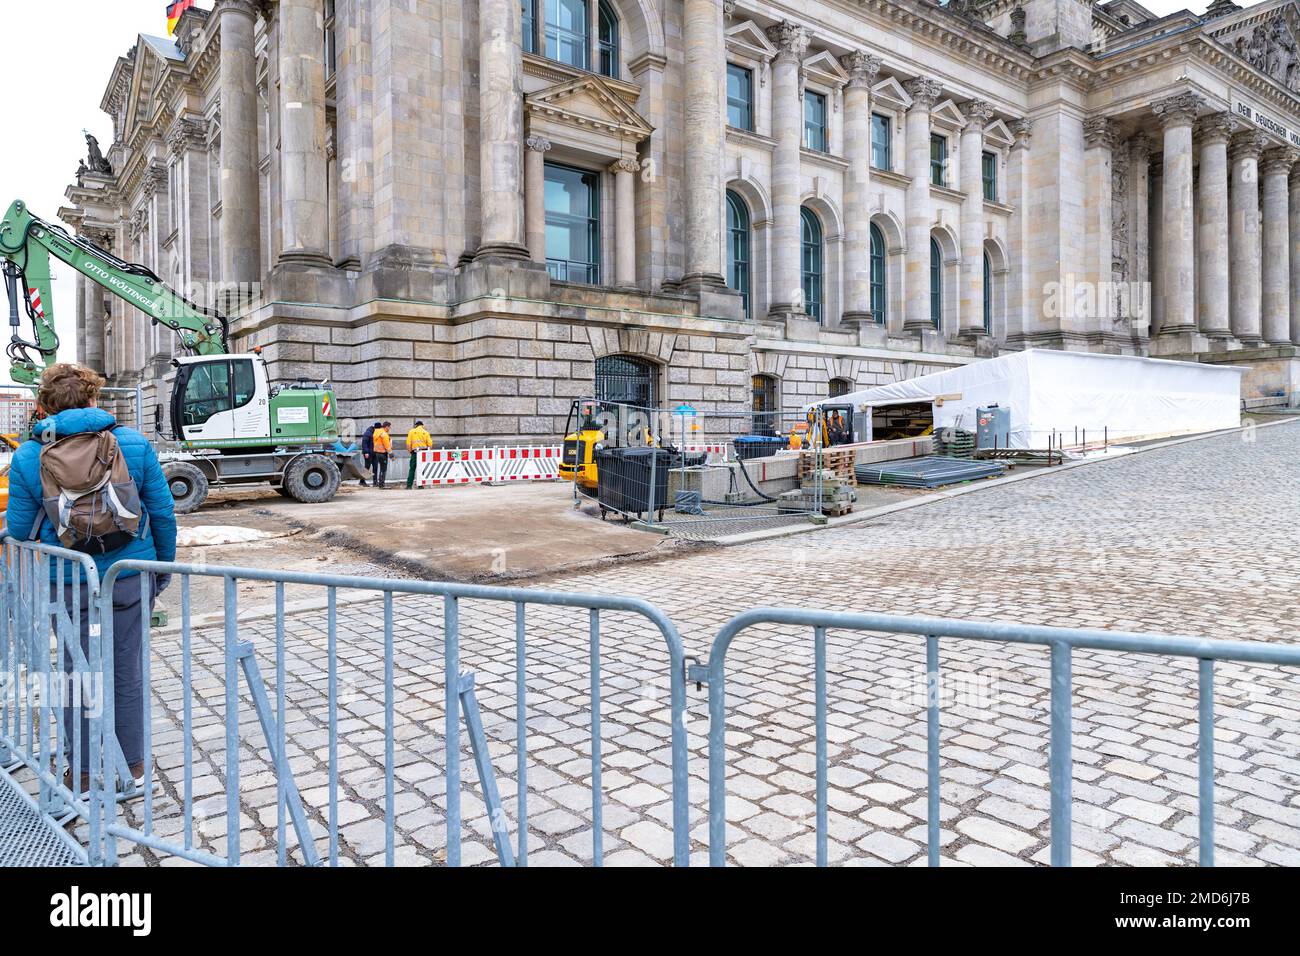 The renovation works in front of the Bundestag building. The German federal parliament. Сonstruction equipment in Berlin. Stock Photo